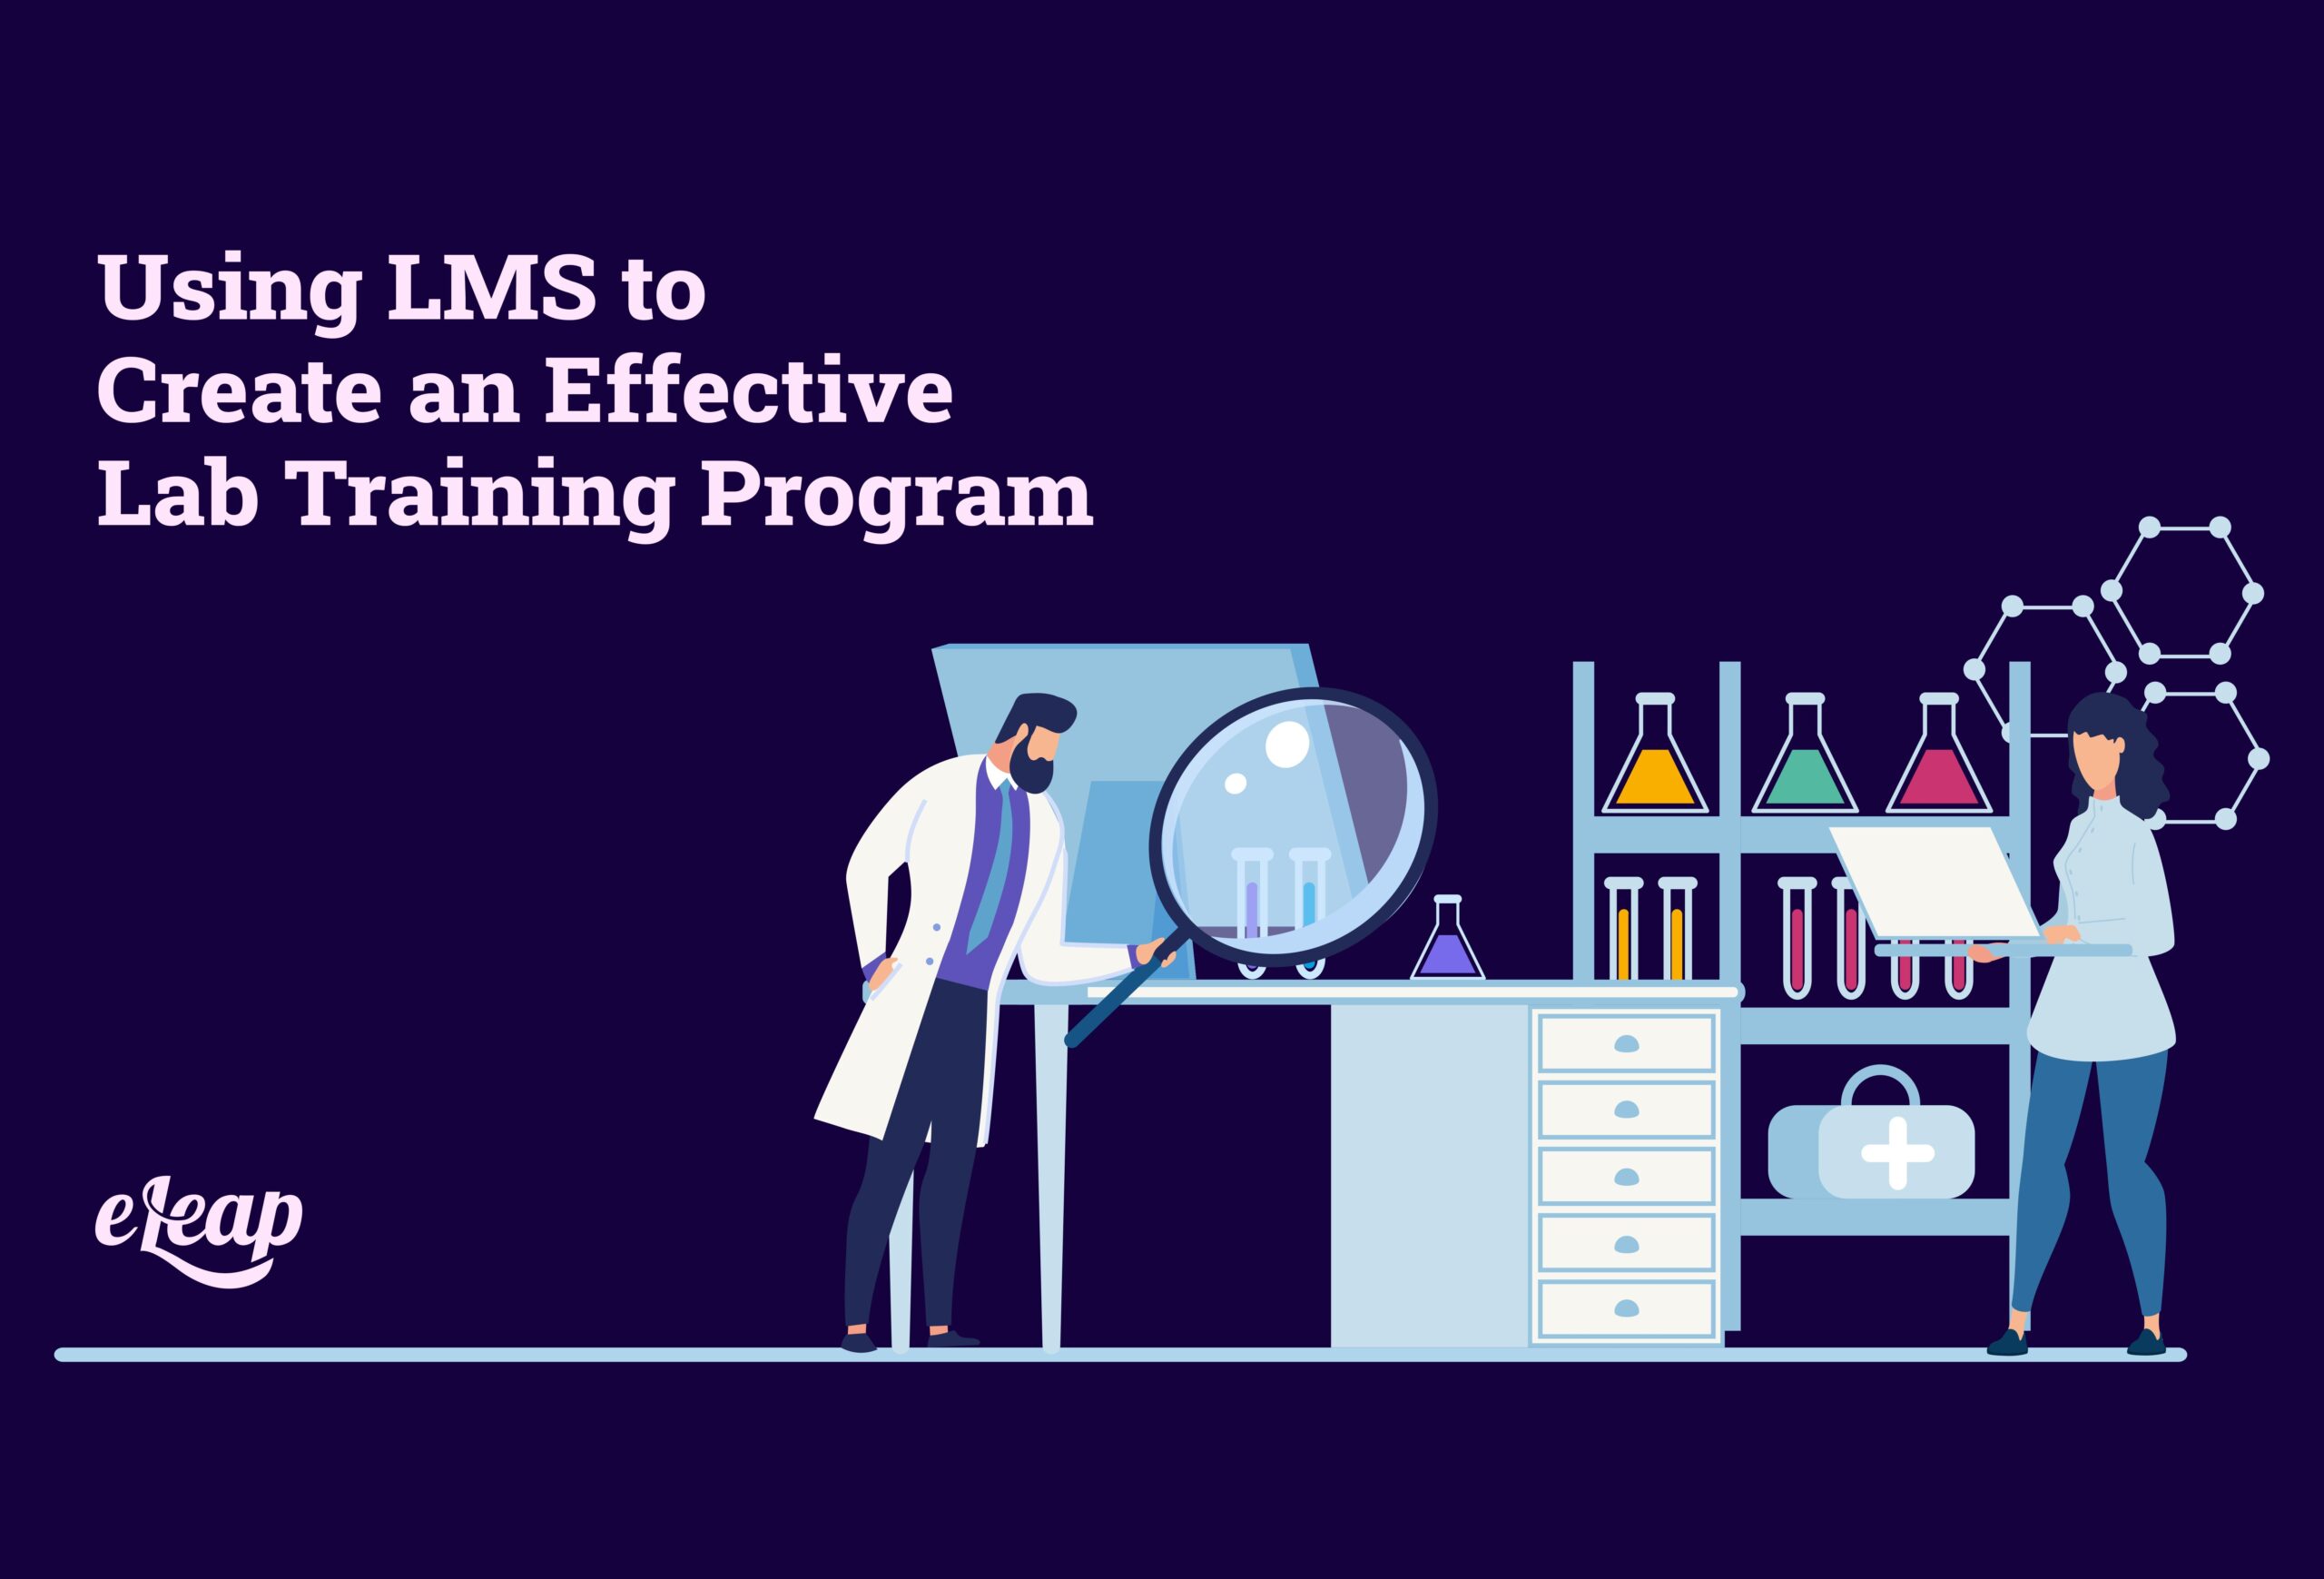 Using LMS to Create an Effective Lab Training Program